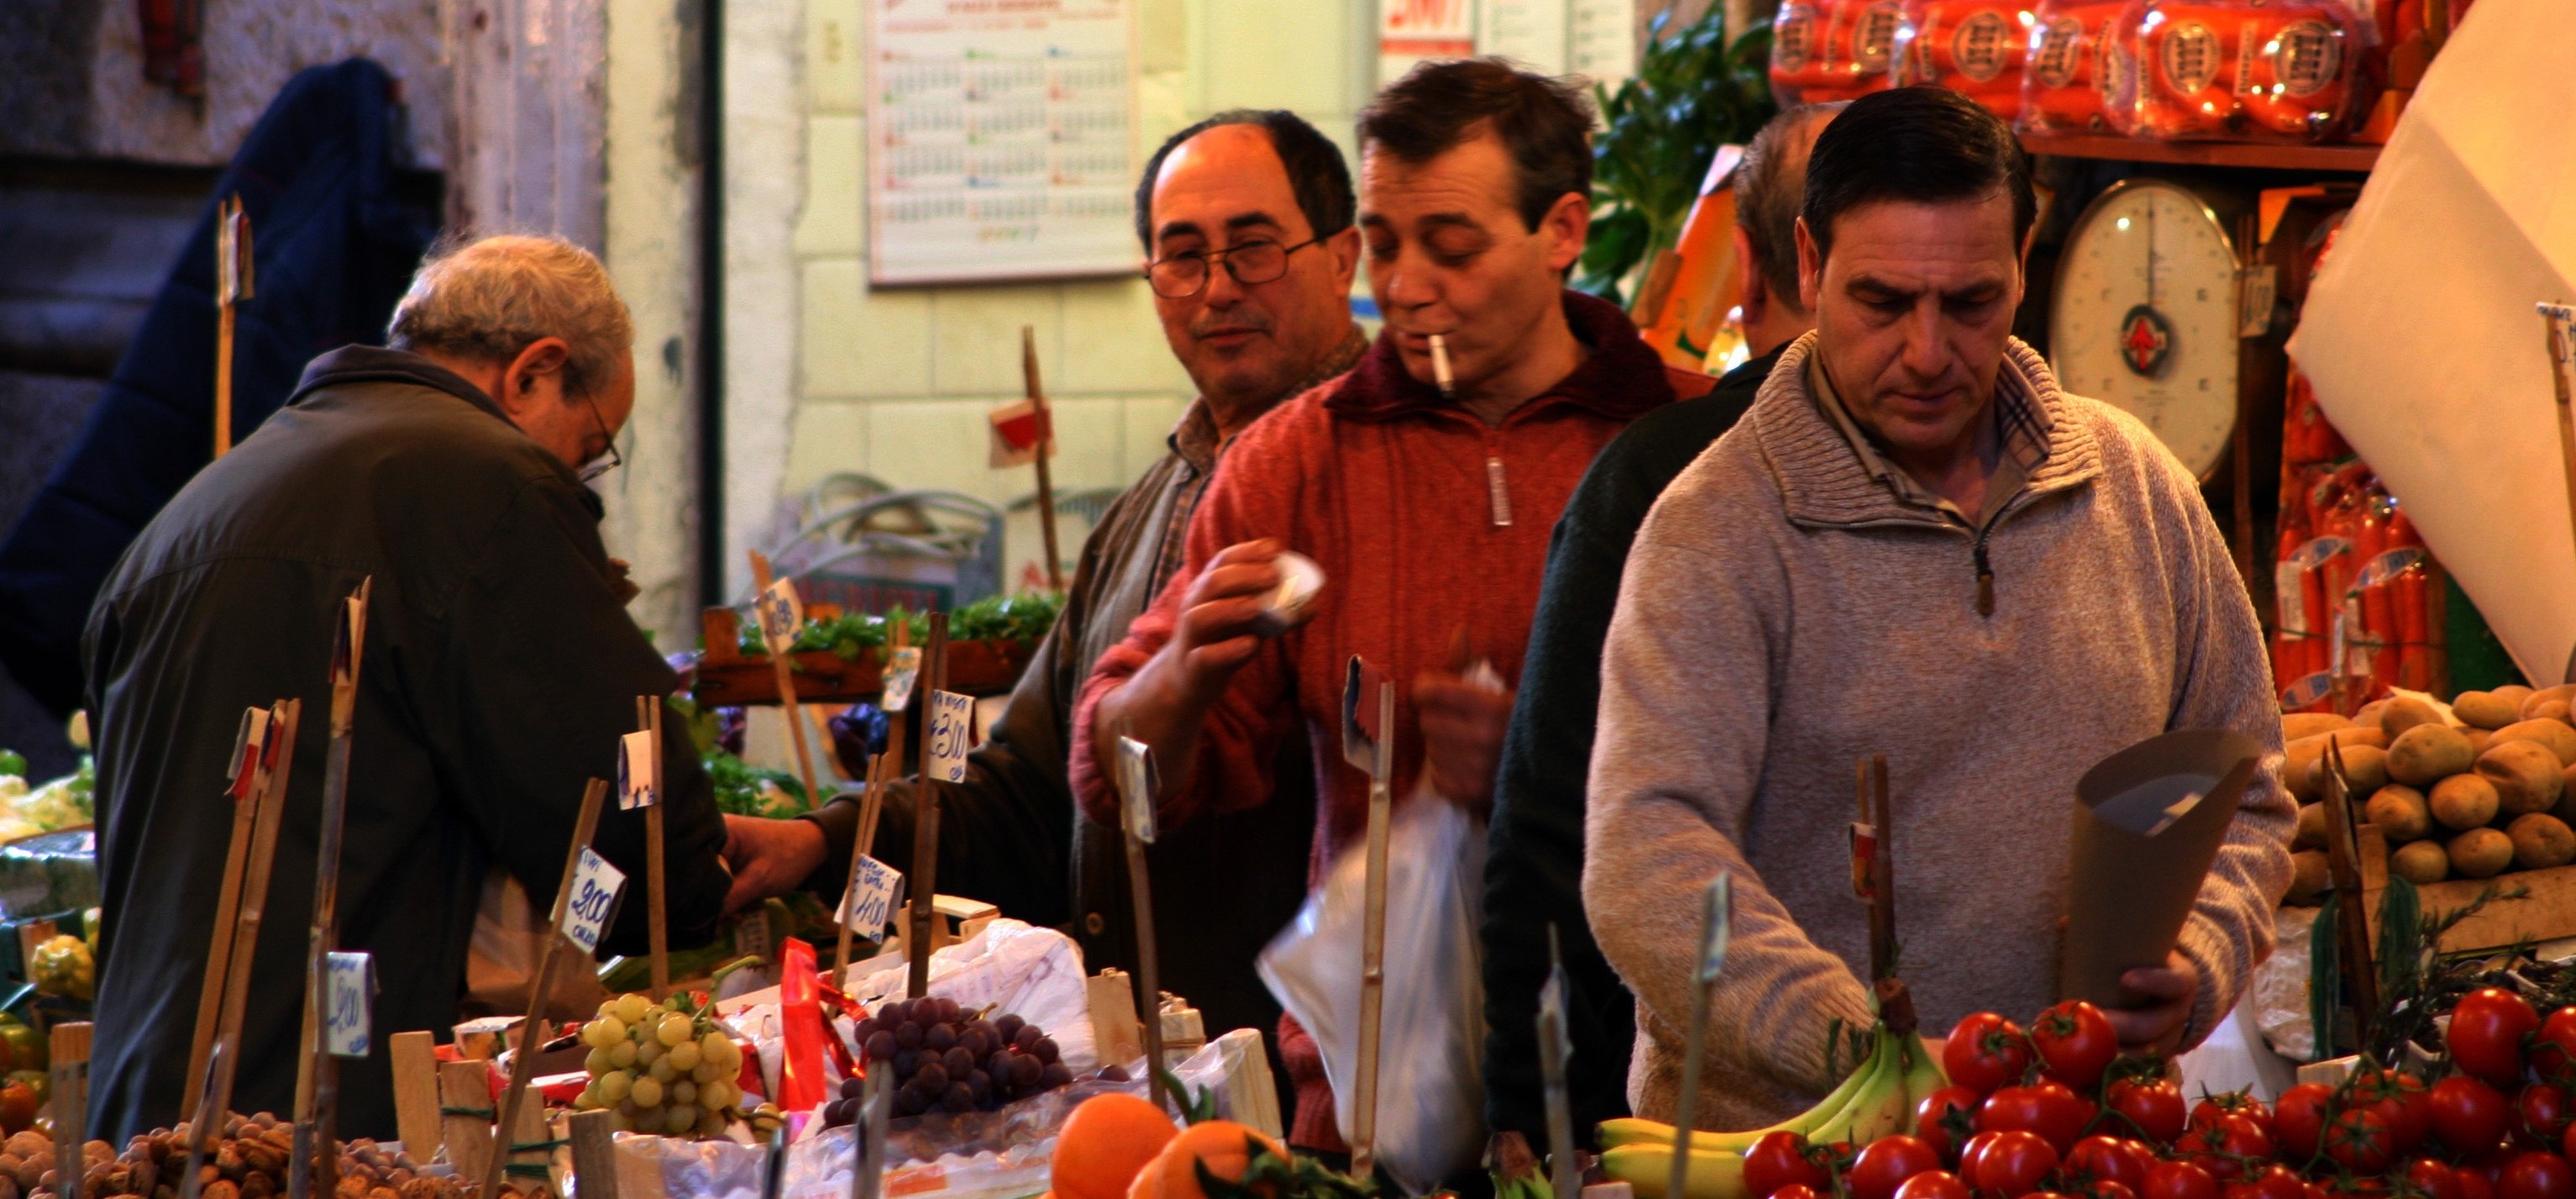 Palermo_Guided_Tour_Market.JPG